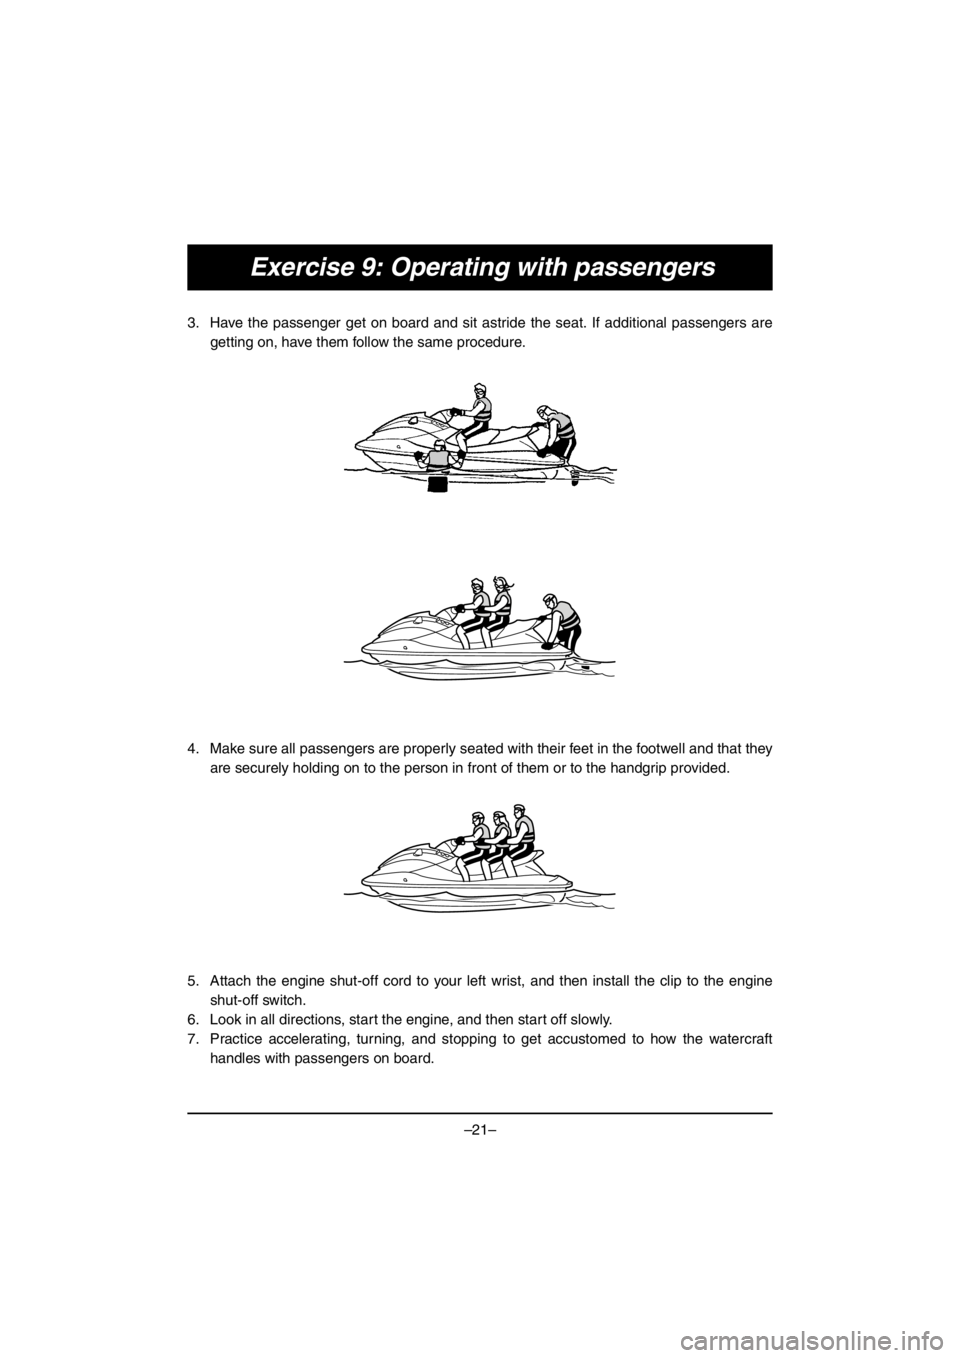 YAMAHA V1 2016  Notices Demploi (in French) –21–
Exercise 9: Operating with passengers
3. Have the passenger get on board and sit astride the seat. If additional passengers are
getting on, have them follow the same procedure. 
4. Make sure 